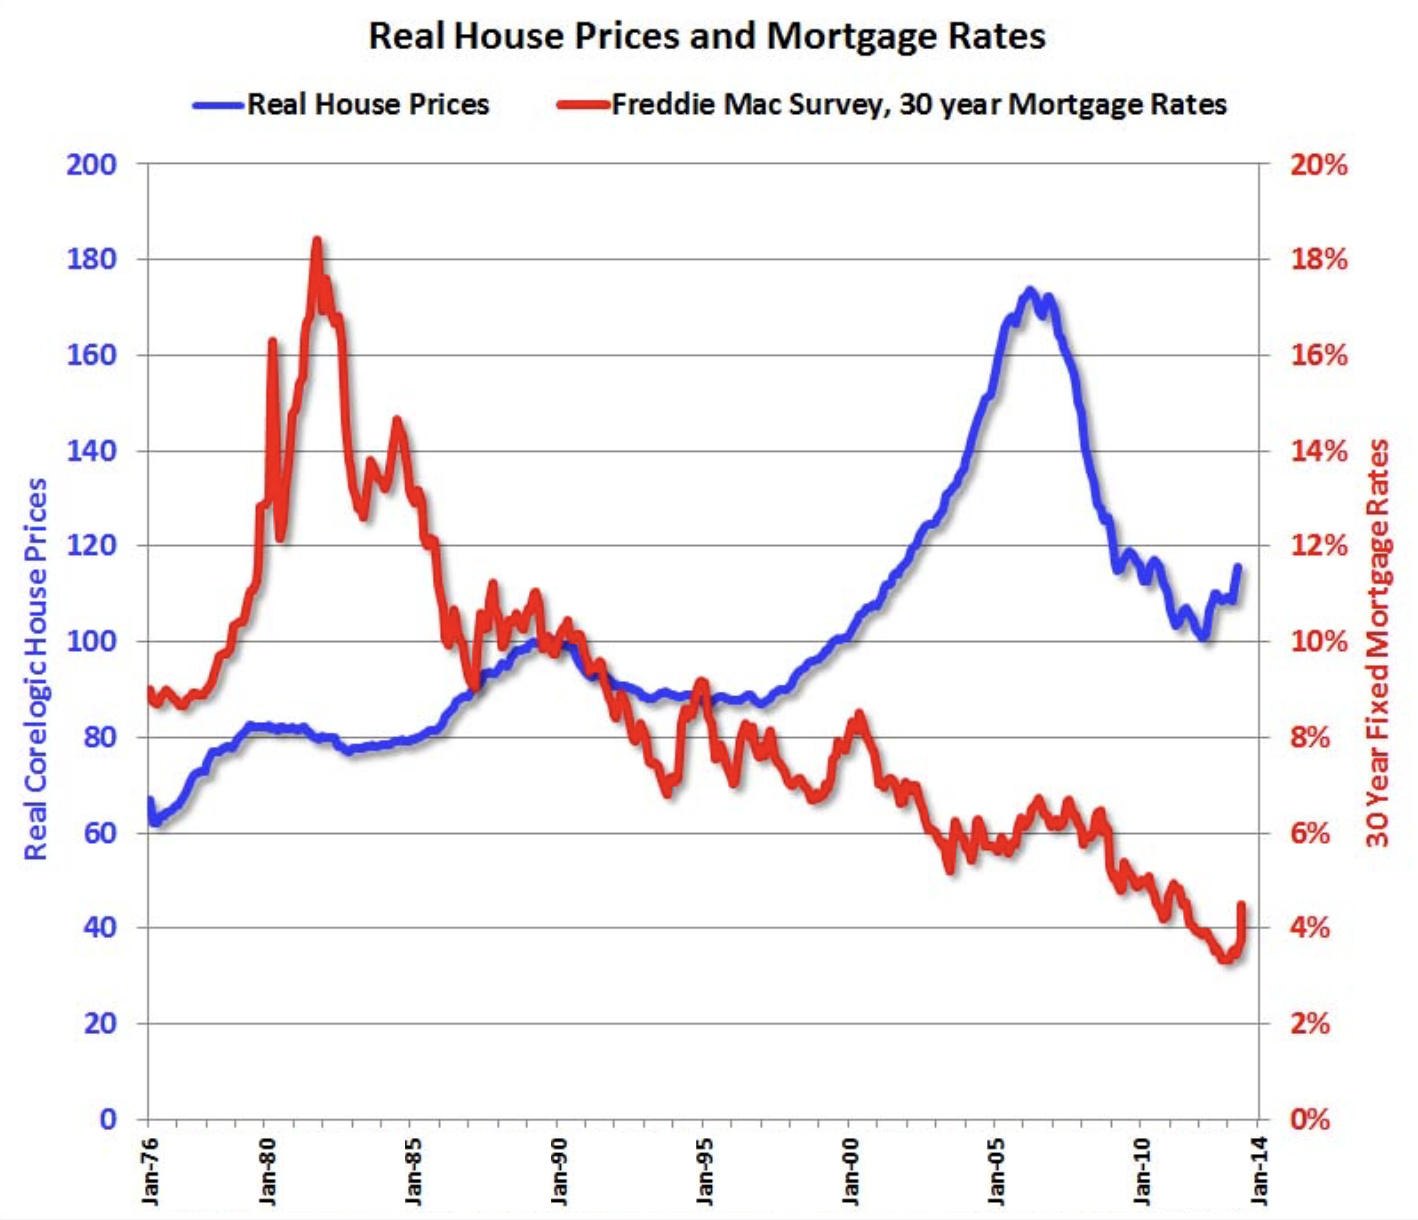 Real Estate Price And 30 Year Mortgage Rates, U.S. (Monetary Policy)